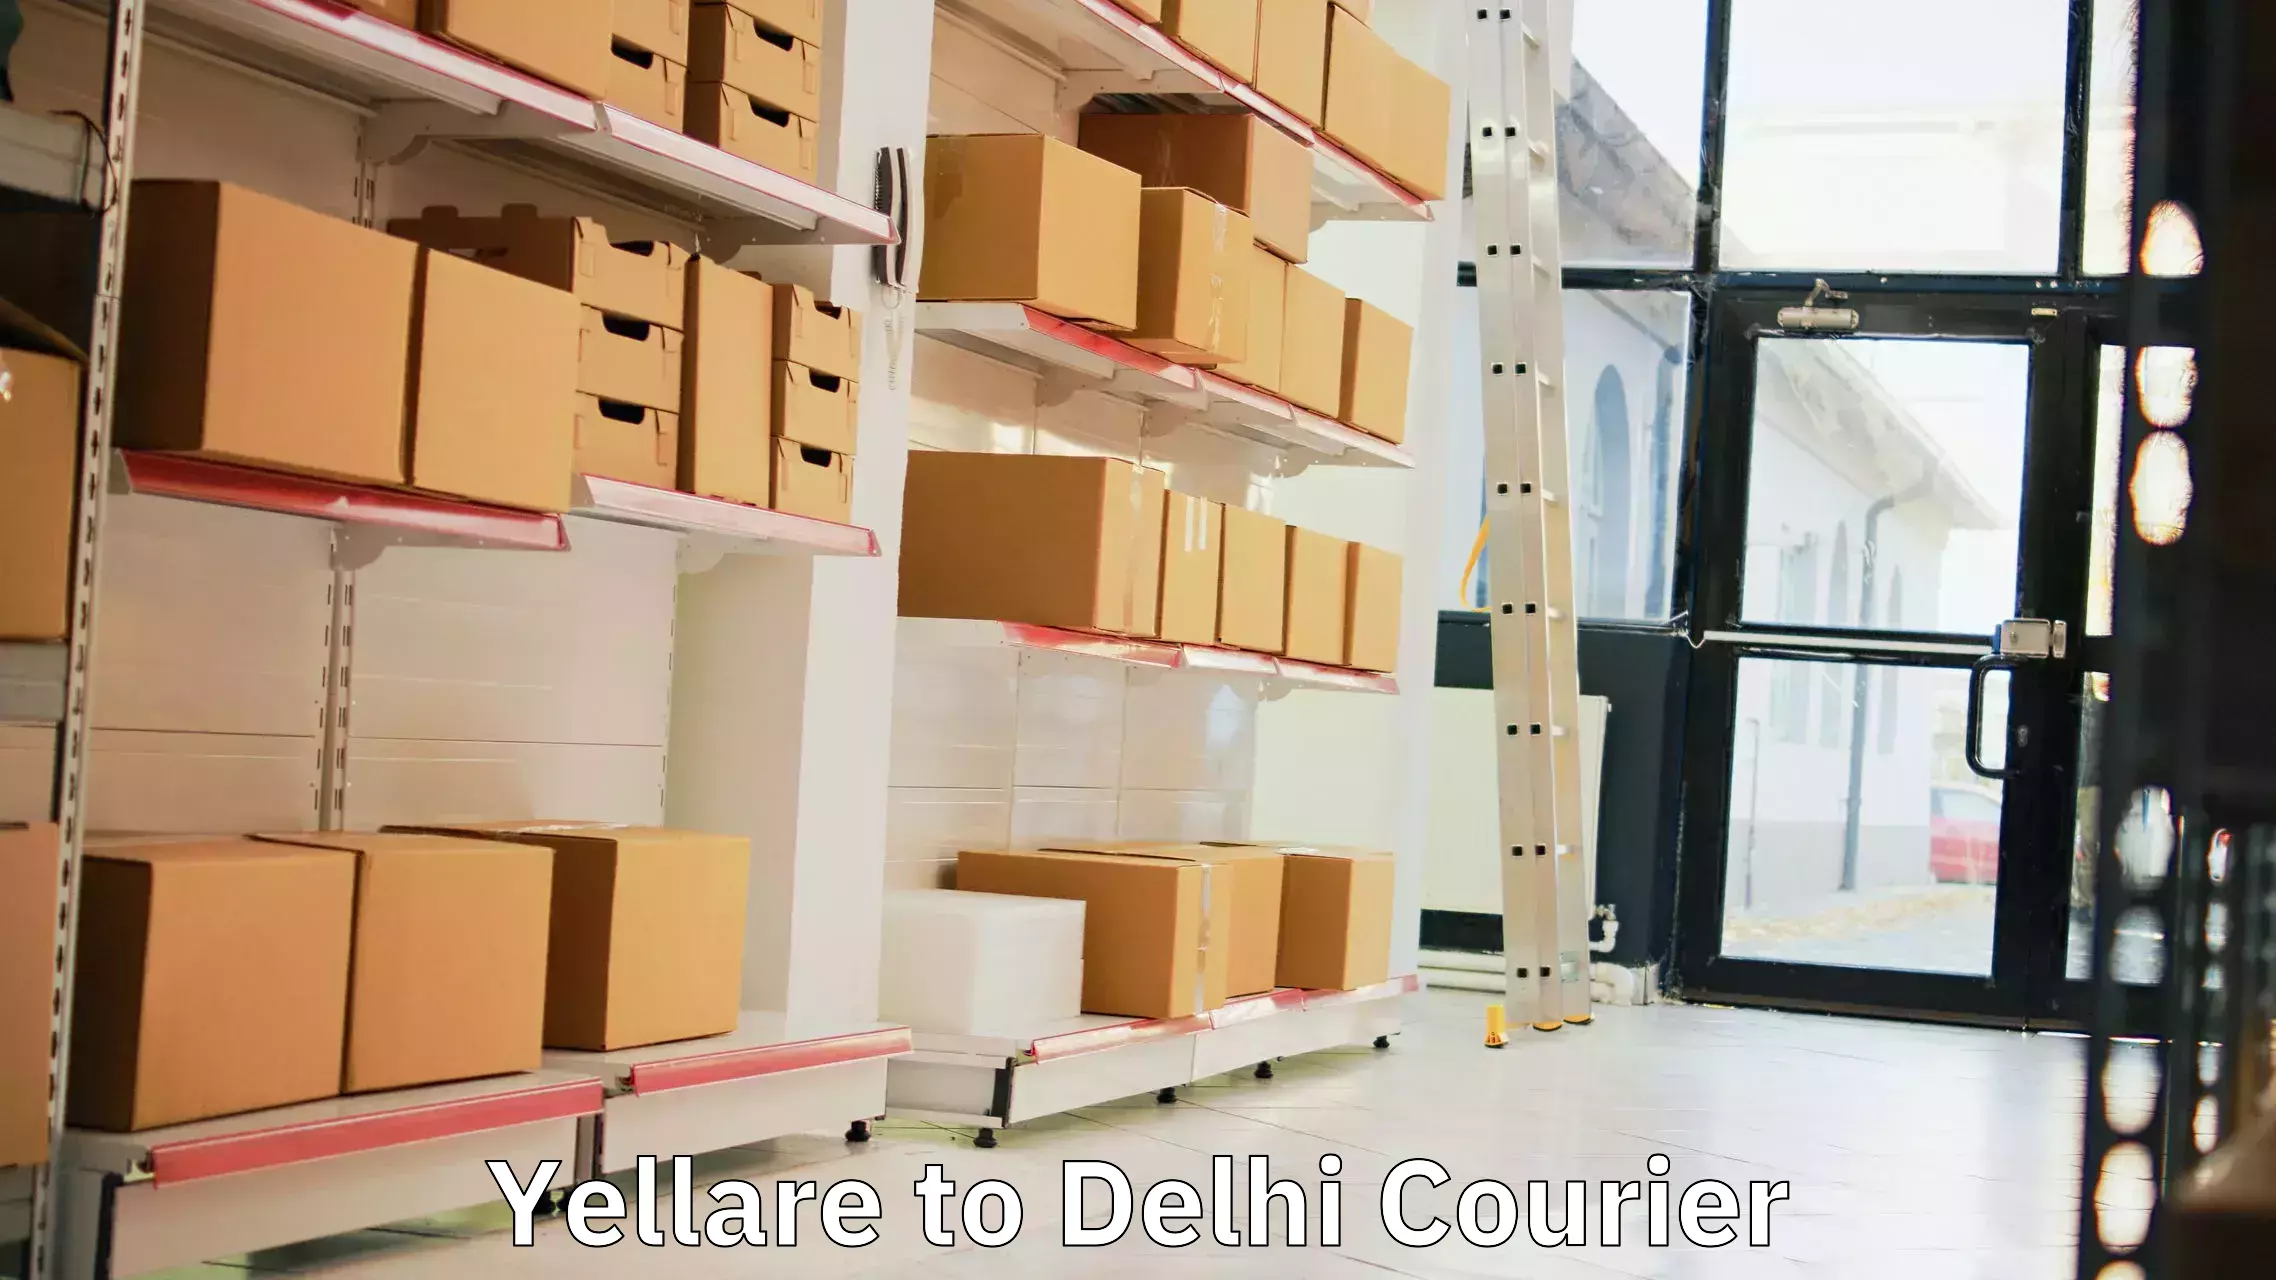 Customized shipping options Yellare to Lodhi Road